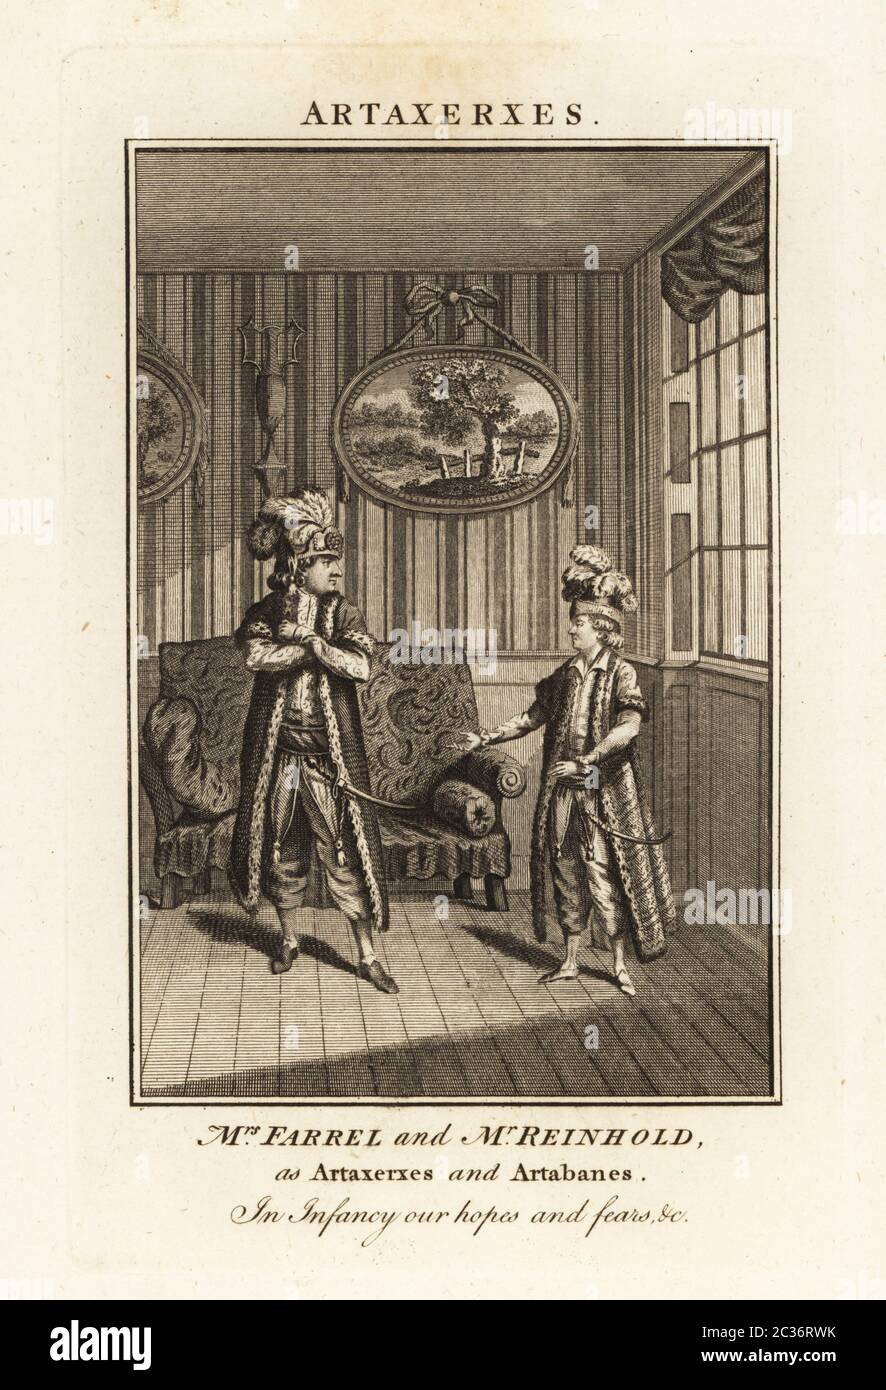 Mrs. Margaret Farrel and Mr. Charles Frederick Reinhold in Persian costume as Artaxerxes and Artabanes in Thomas Arne’s opera Artaxerxes, 1777. Farrell, born Margaret Doyle and later Margaret Kennedy, was a contralto singer and actress (died 1793) Reinhold was an organist, music teacher and later singer on stage and at pleasure gardens, 1741-1815. Copperplate engraving from The Universal Magazine, J. Lowndes, London, 1778. Stock Photo